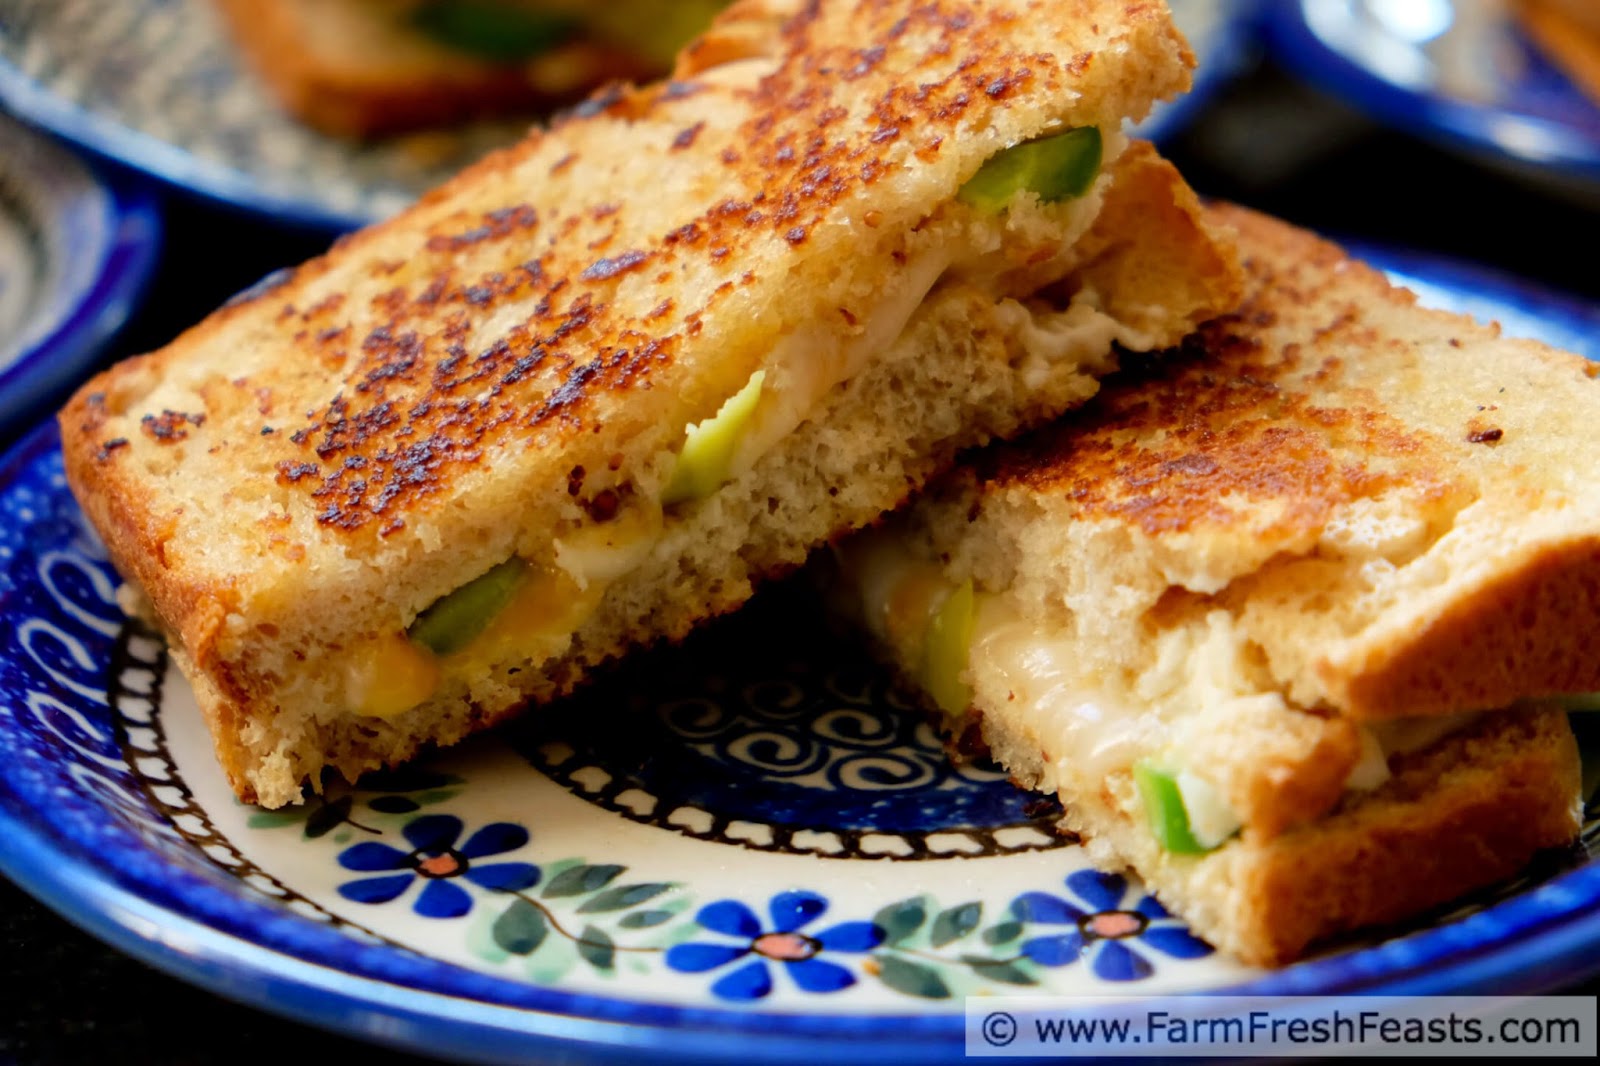 http://www.farmfreshfeasts.com/2015/04/double-pepper-double-cheese-grilled.html